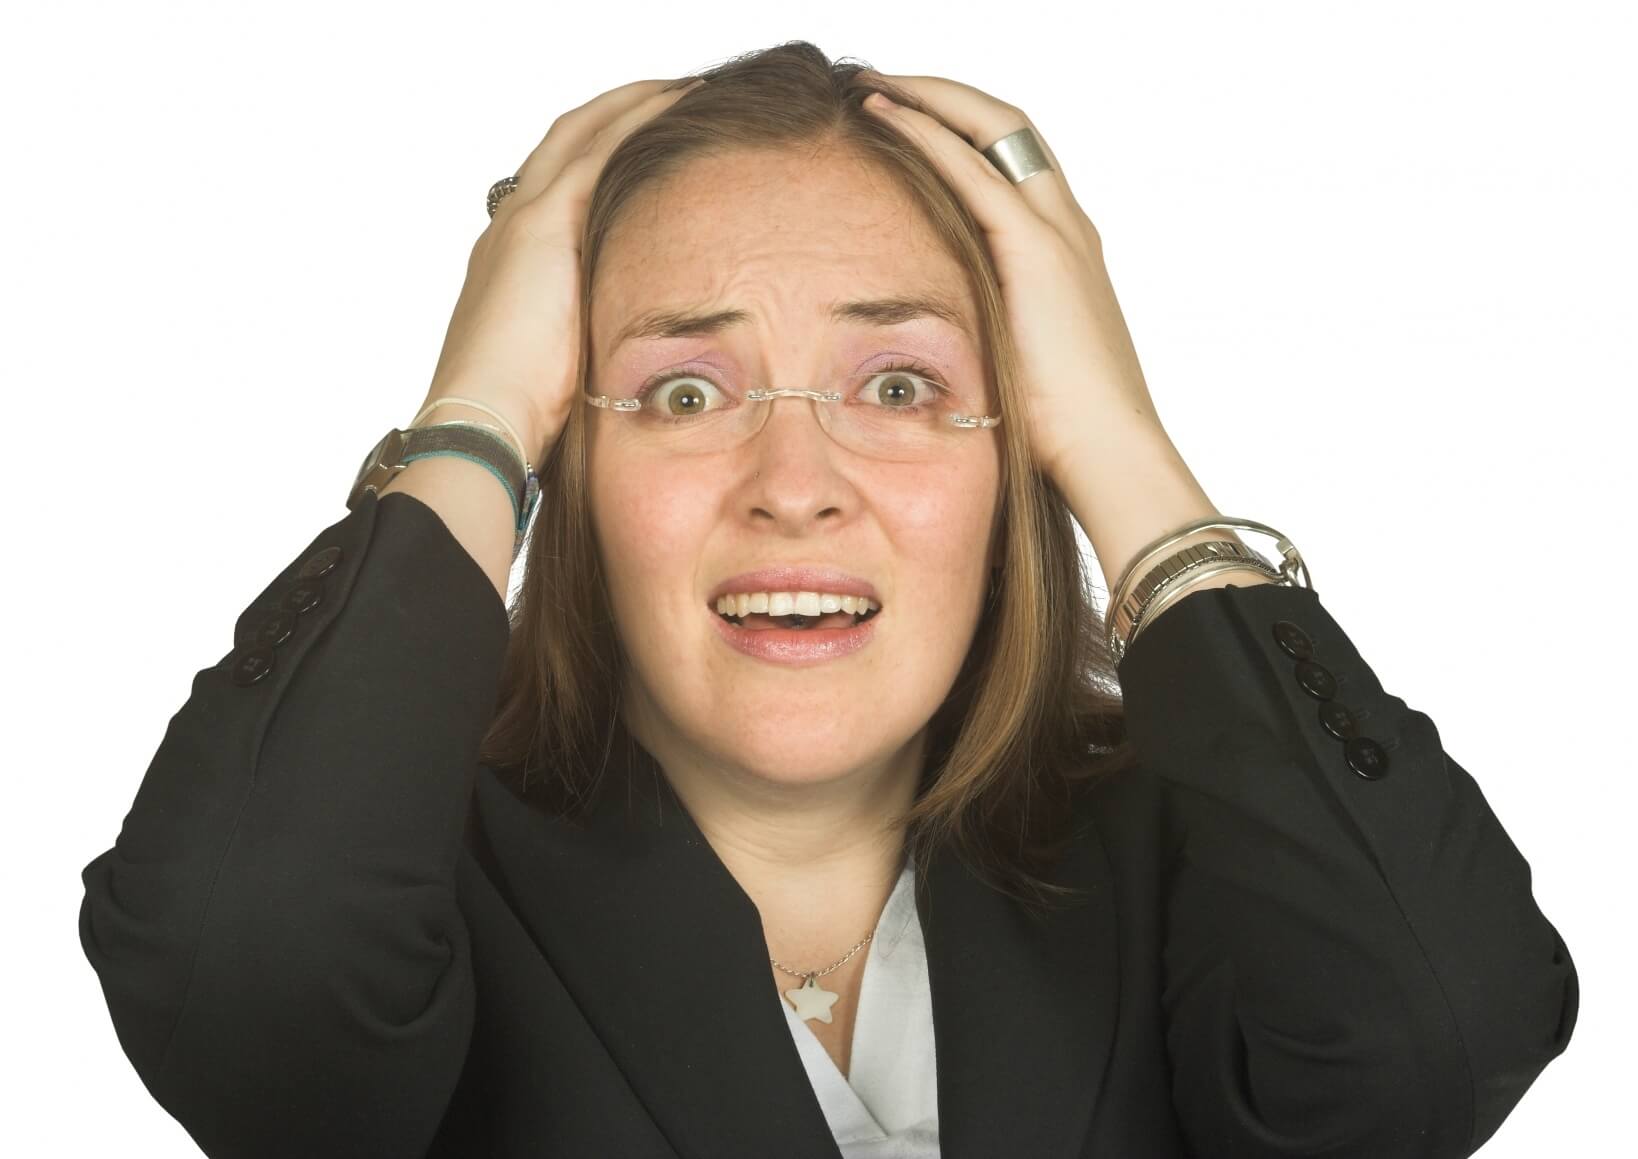 A woman in a suit holding her head with both hands.